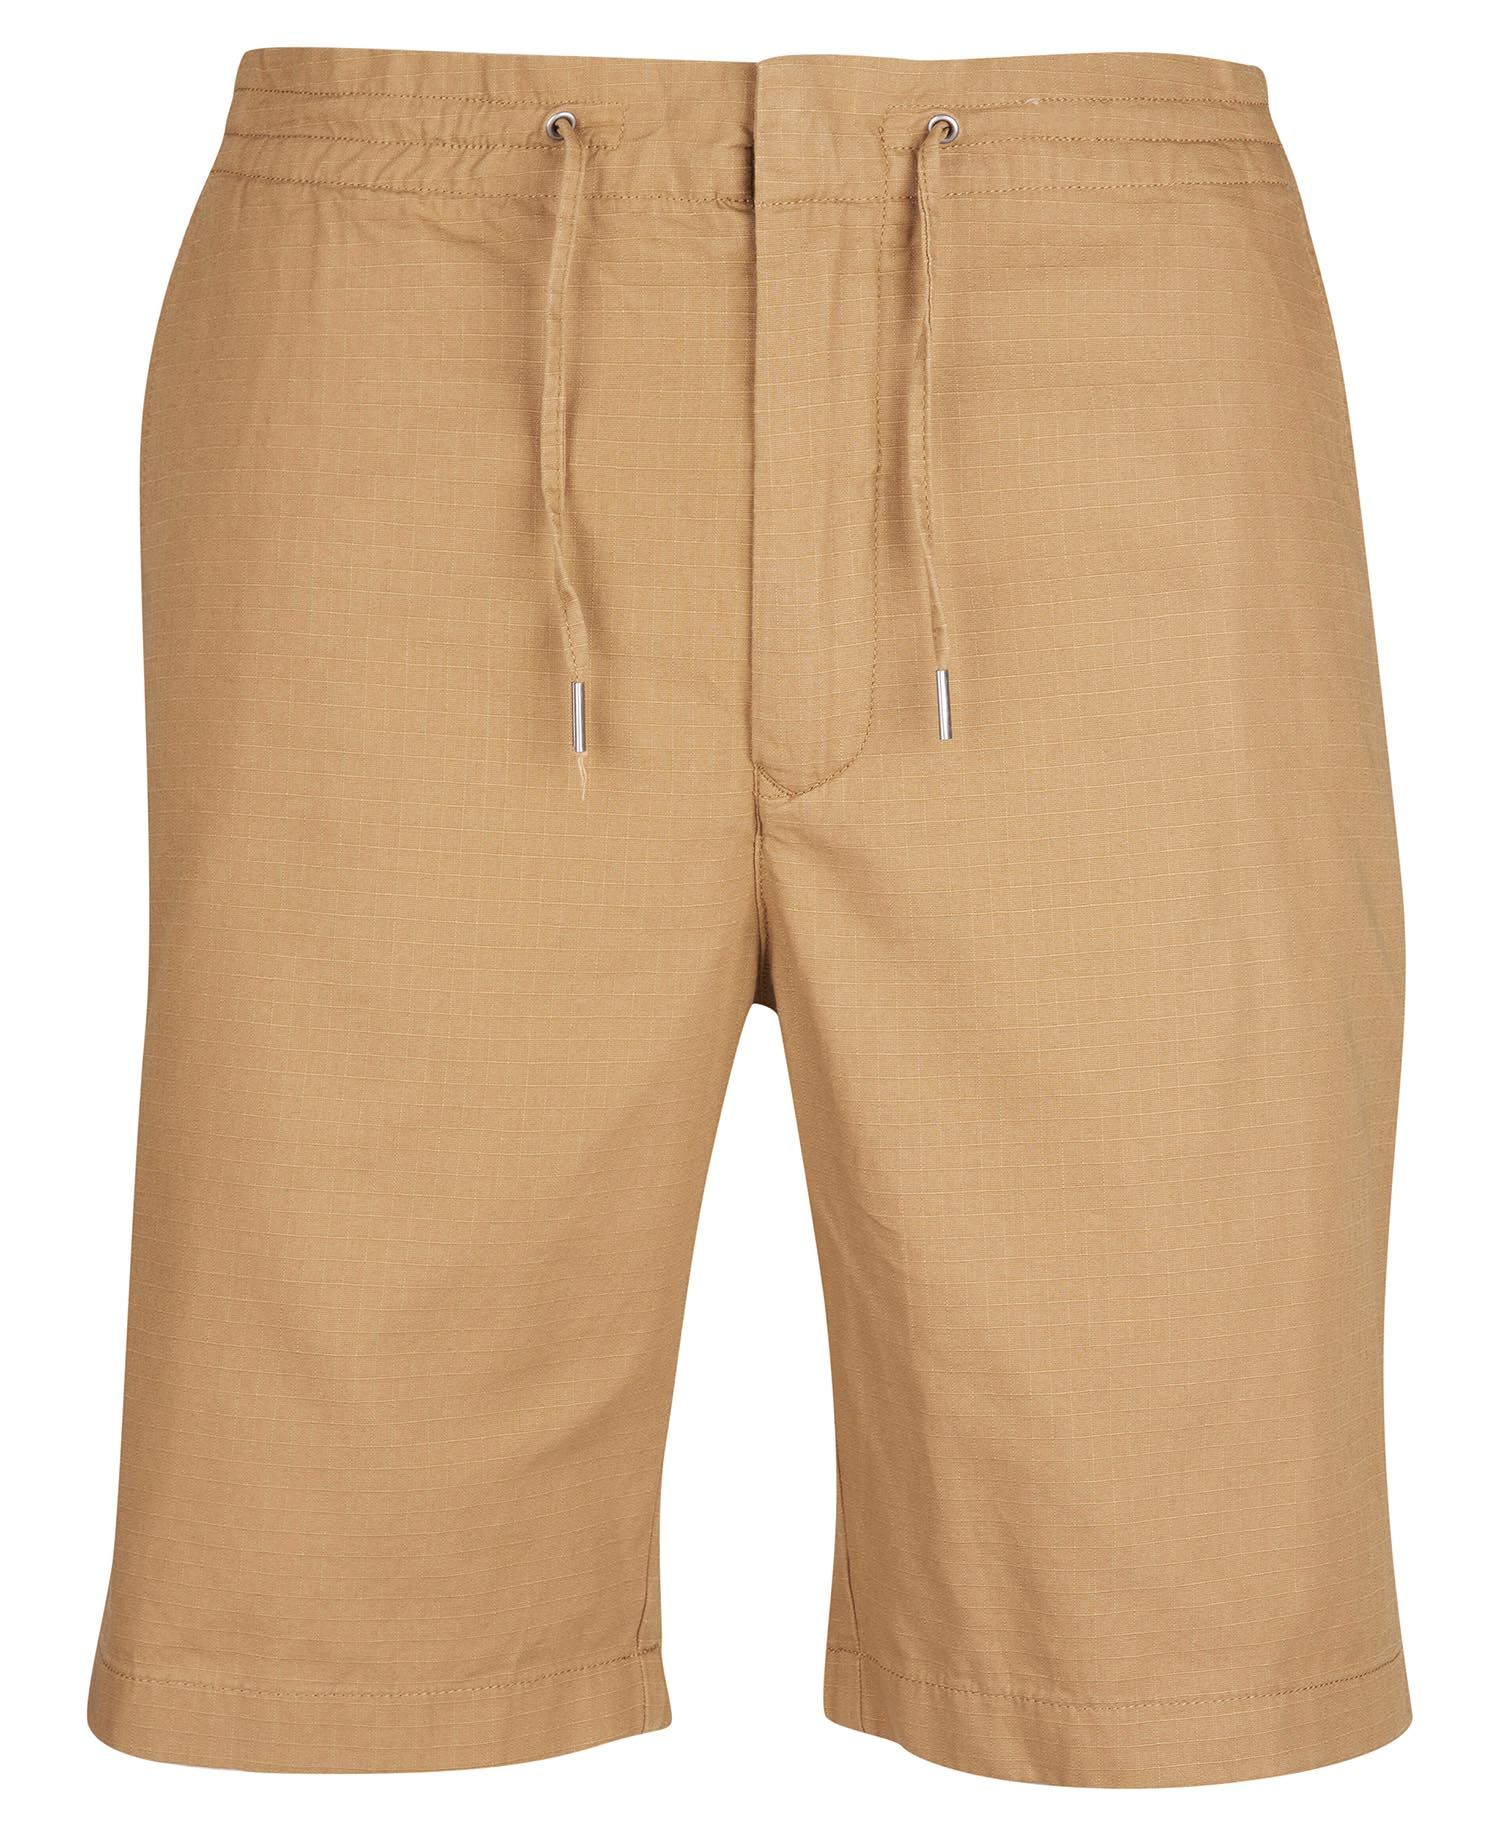 Barbour Roller Ripstop Shorts